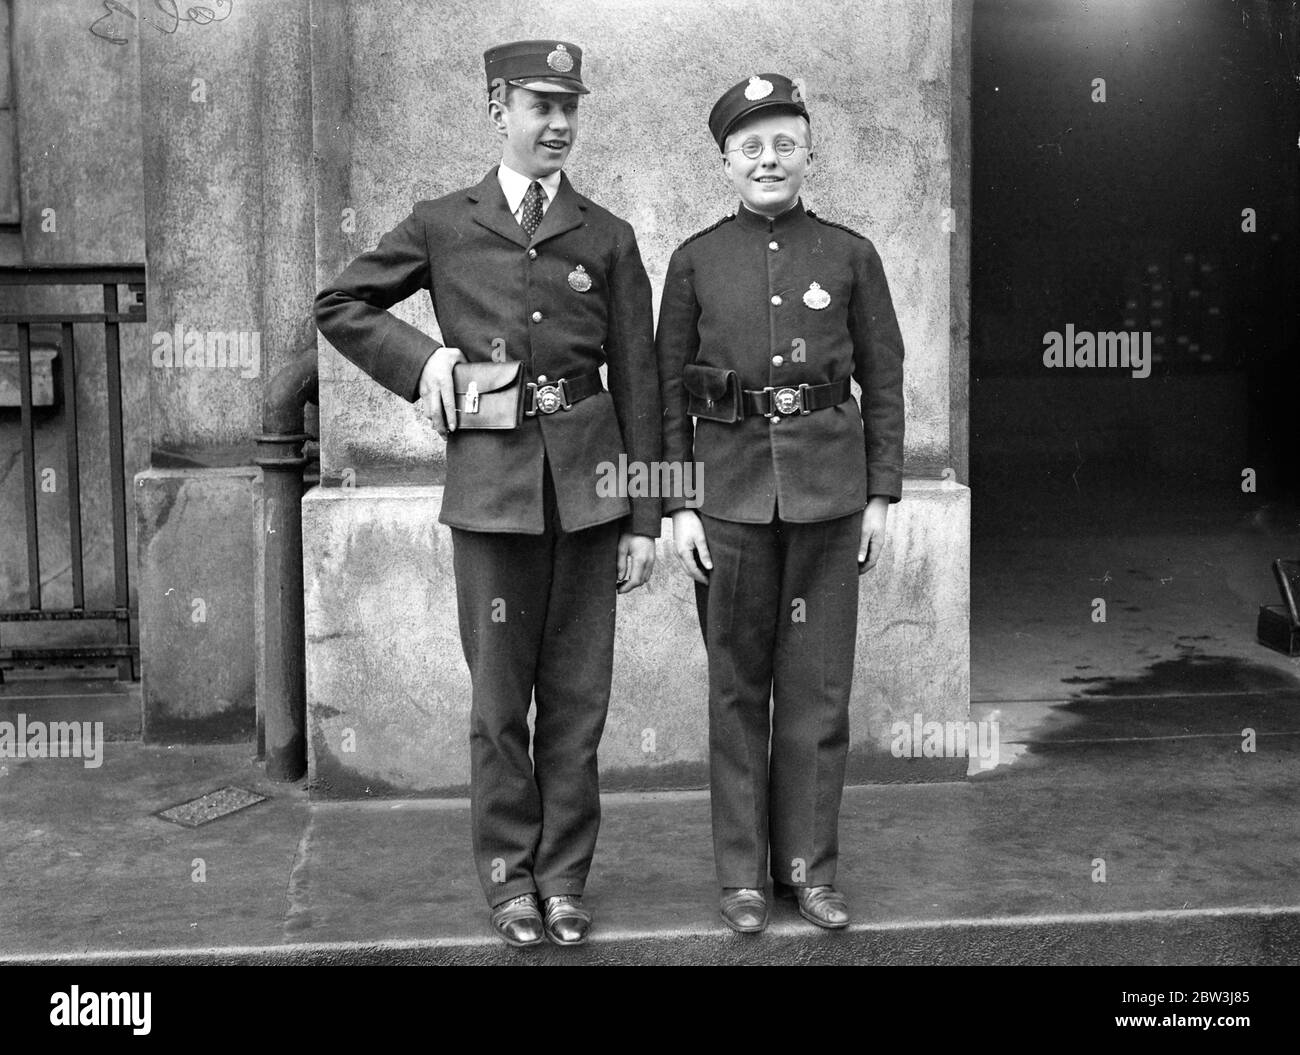 Smarter Uniforms For Post Office Messenger Boys - Open Collars Post Office Messenger boys are being equiped with smarter uniforms . The new design includes an open collar and a larger pouch to accomodate the  Greetings  telegrams . There is no braid on the shoulders . Photo shows : The new uniform ( with open collar ) compared with the old at Mount Pleasant 2 Jun 1936 Stock Photo